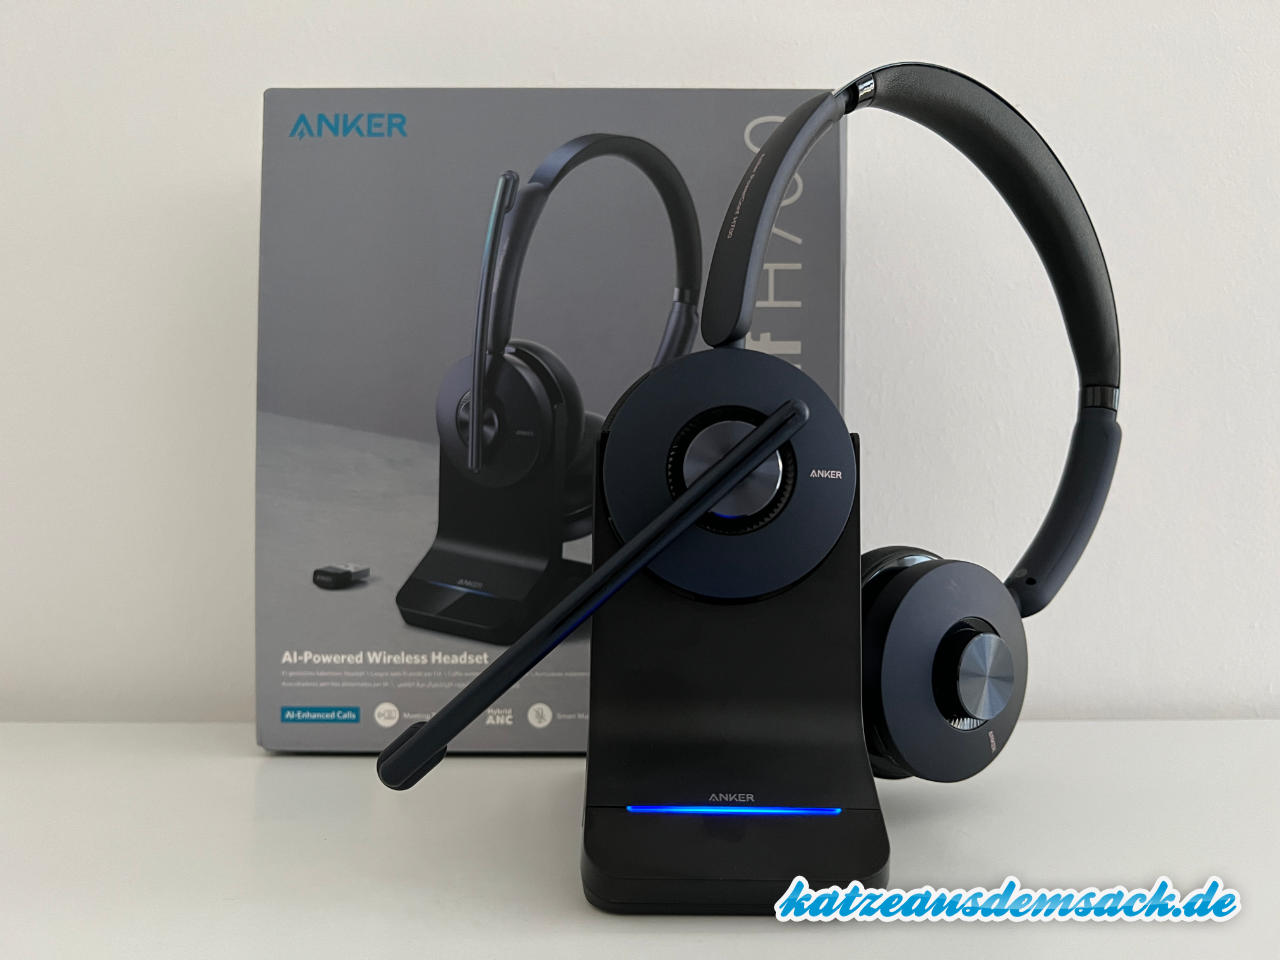 Anker PowerConf H700 kabelloses Headset mit ANC im Test